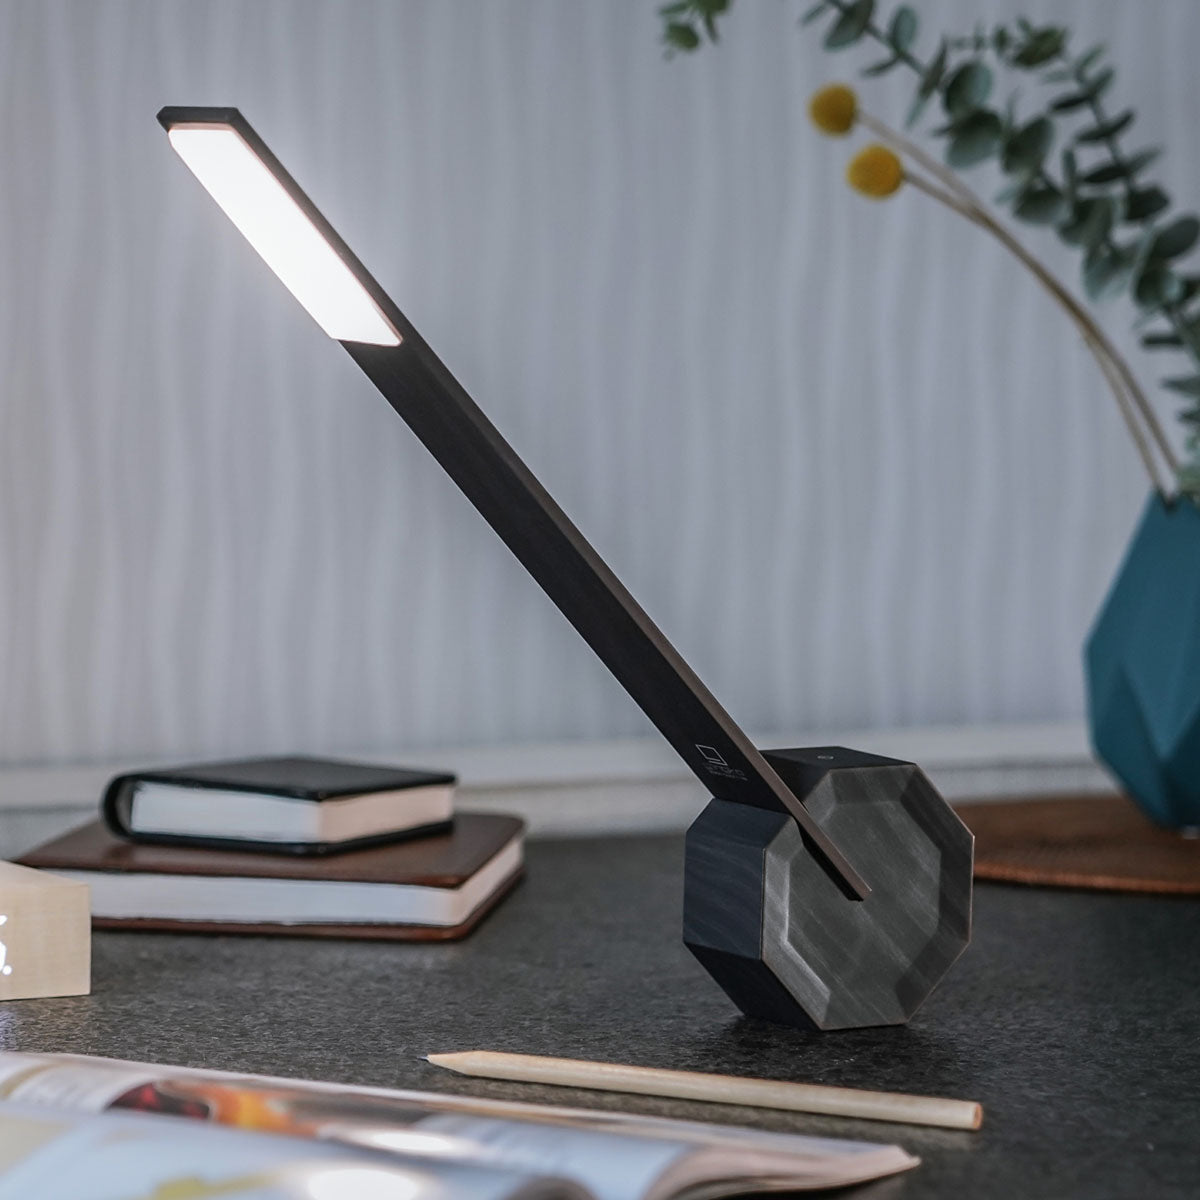 The Octagon One Desk Lamp: Black on a desk besides some books and magazines.